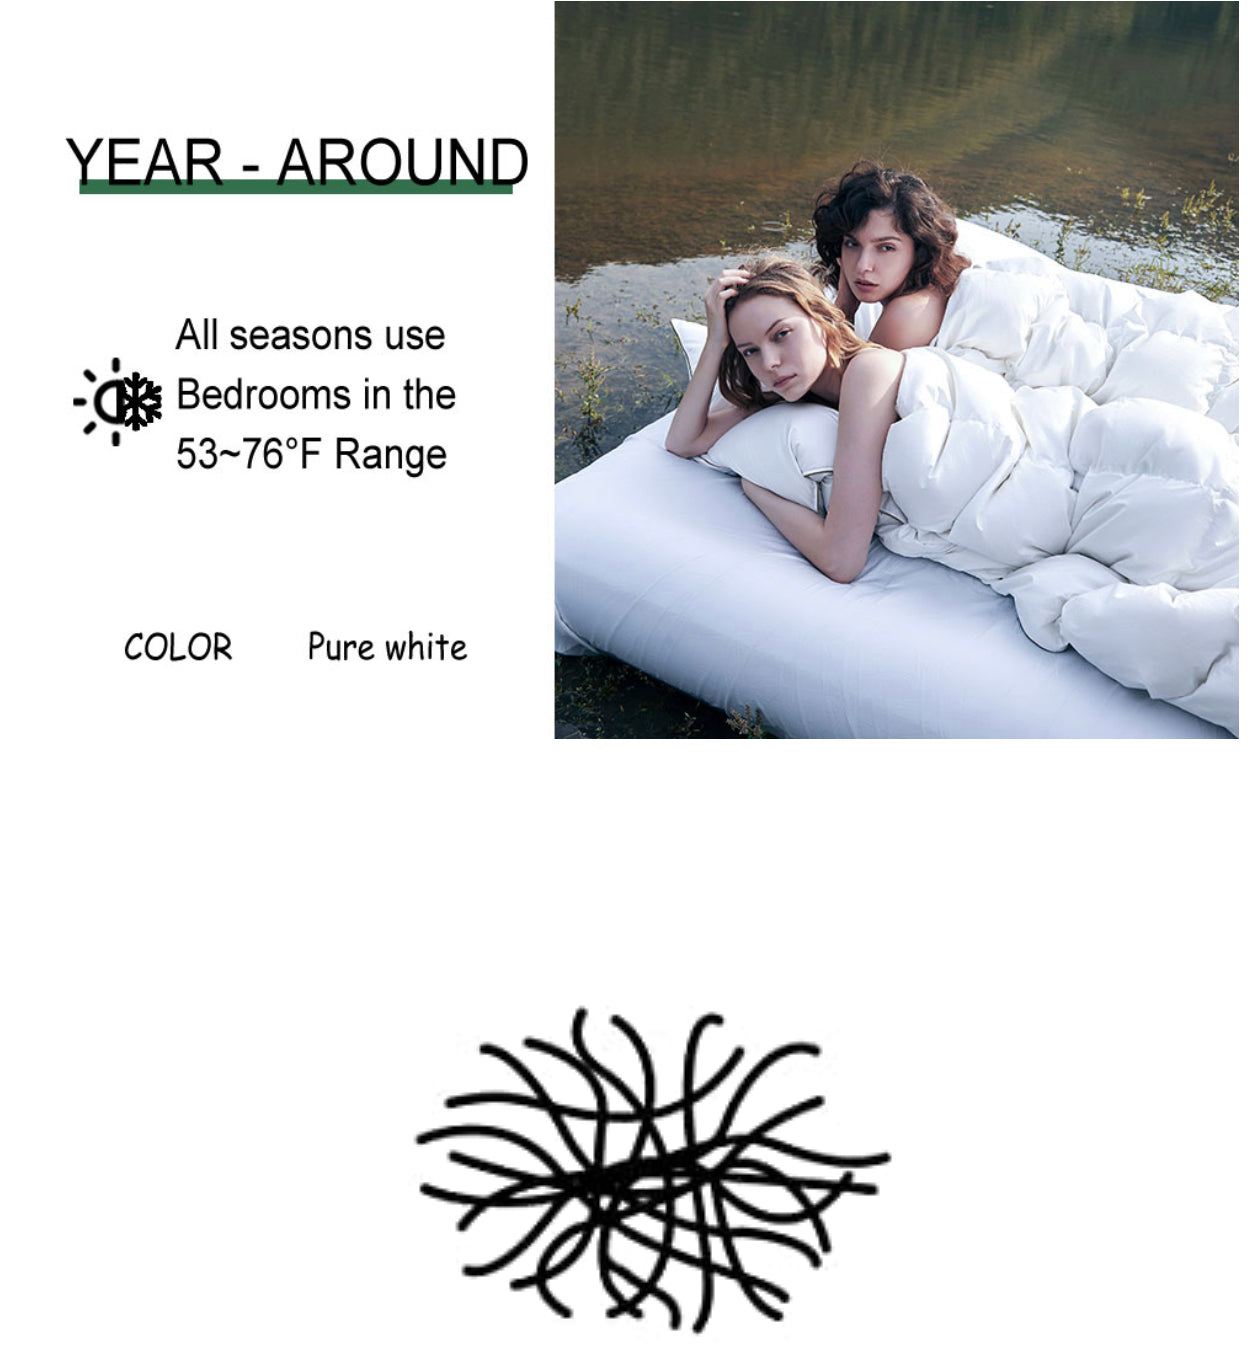 King Bed in a Bag 6-Pieces White Ultra-Soft Cloud Fluffy Plush Luxury All Season Bedding Comforter Set.